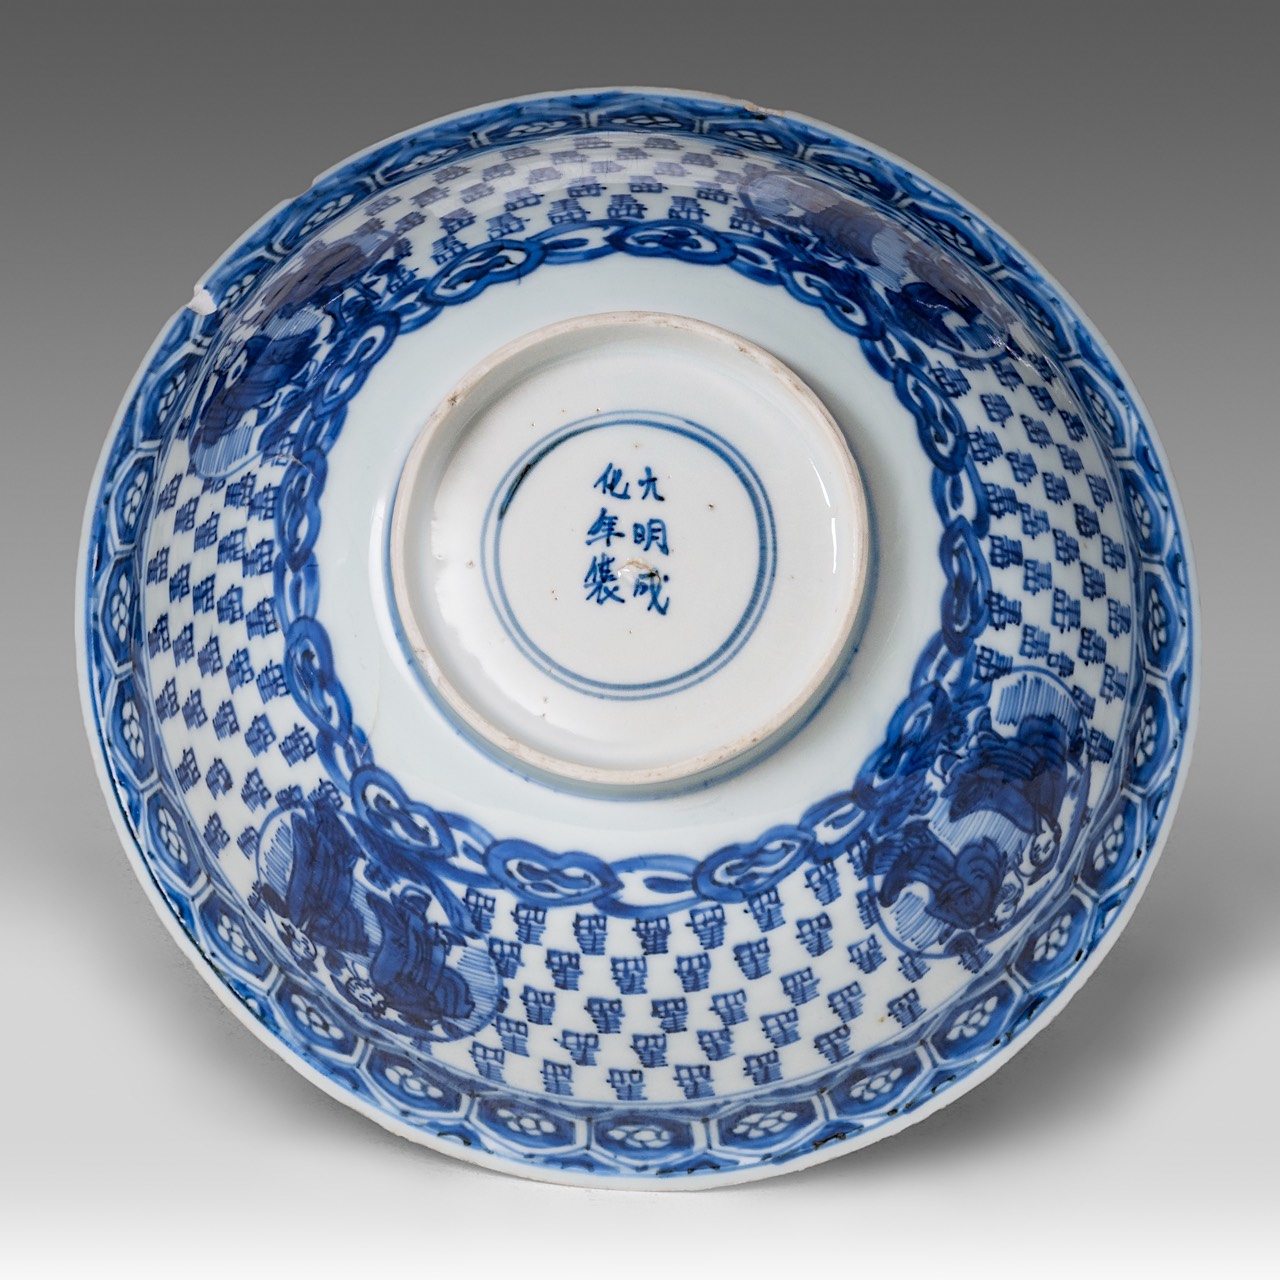 A Chinese blue and white 'Luohan' bowl, Wanli period, Ming dynasty, H 9 - dia 22,5 cm - Image 8 of 8